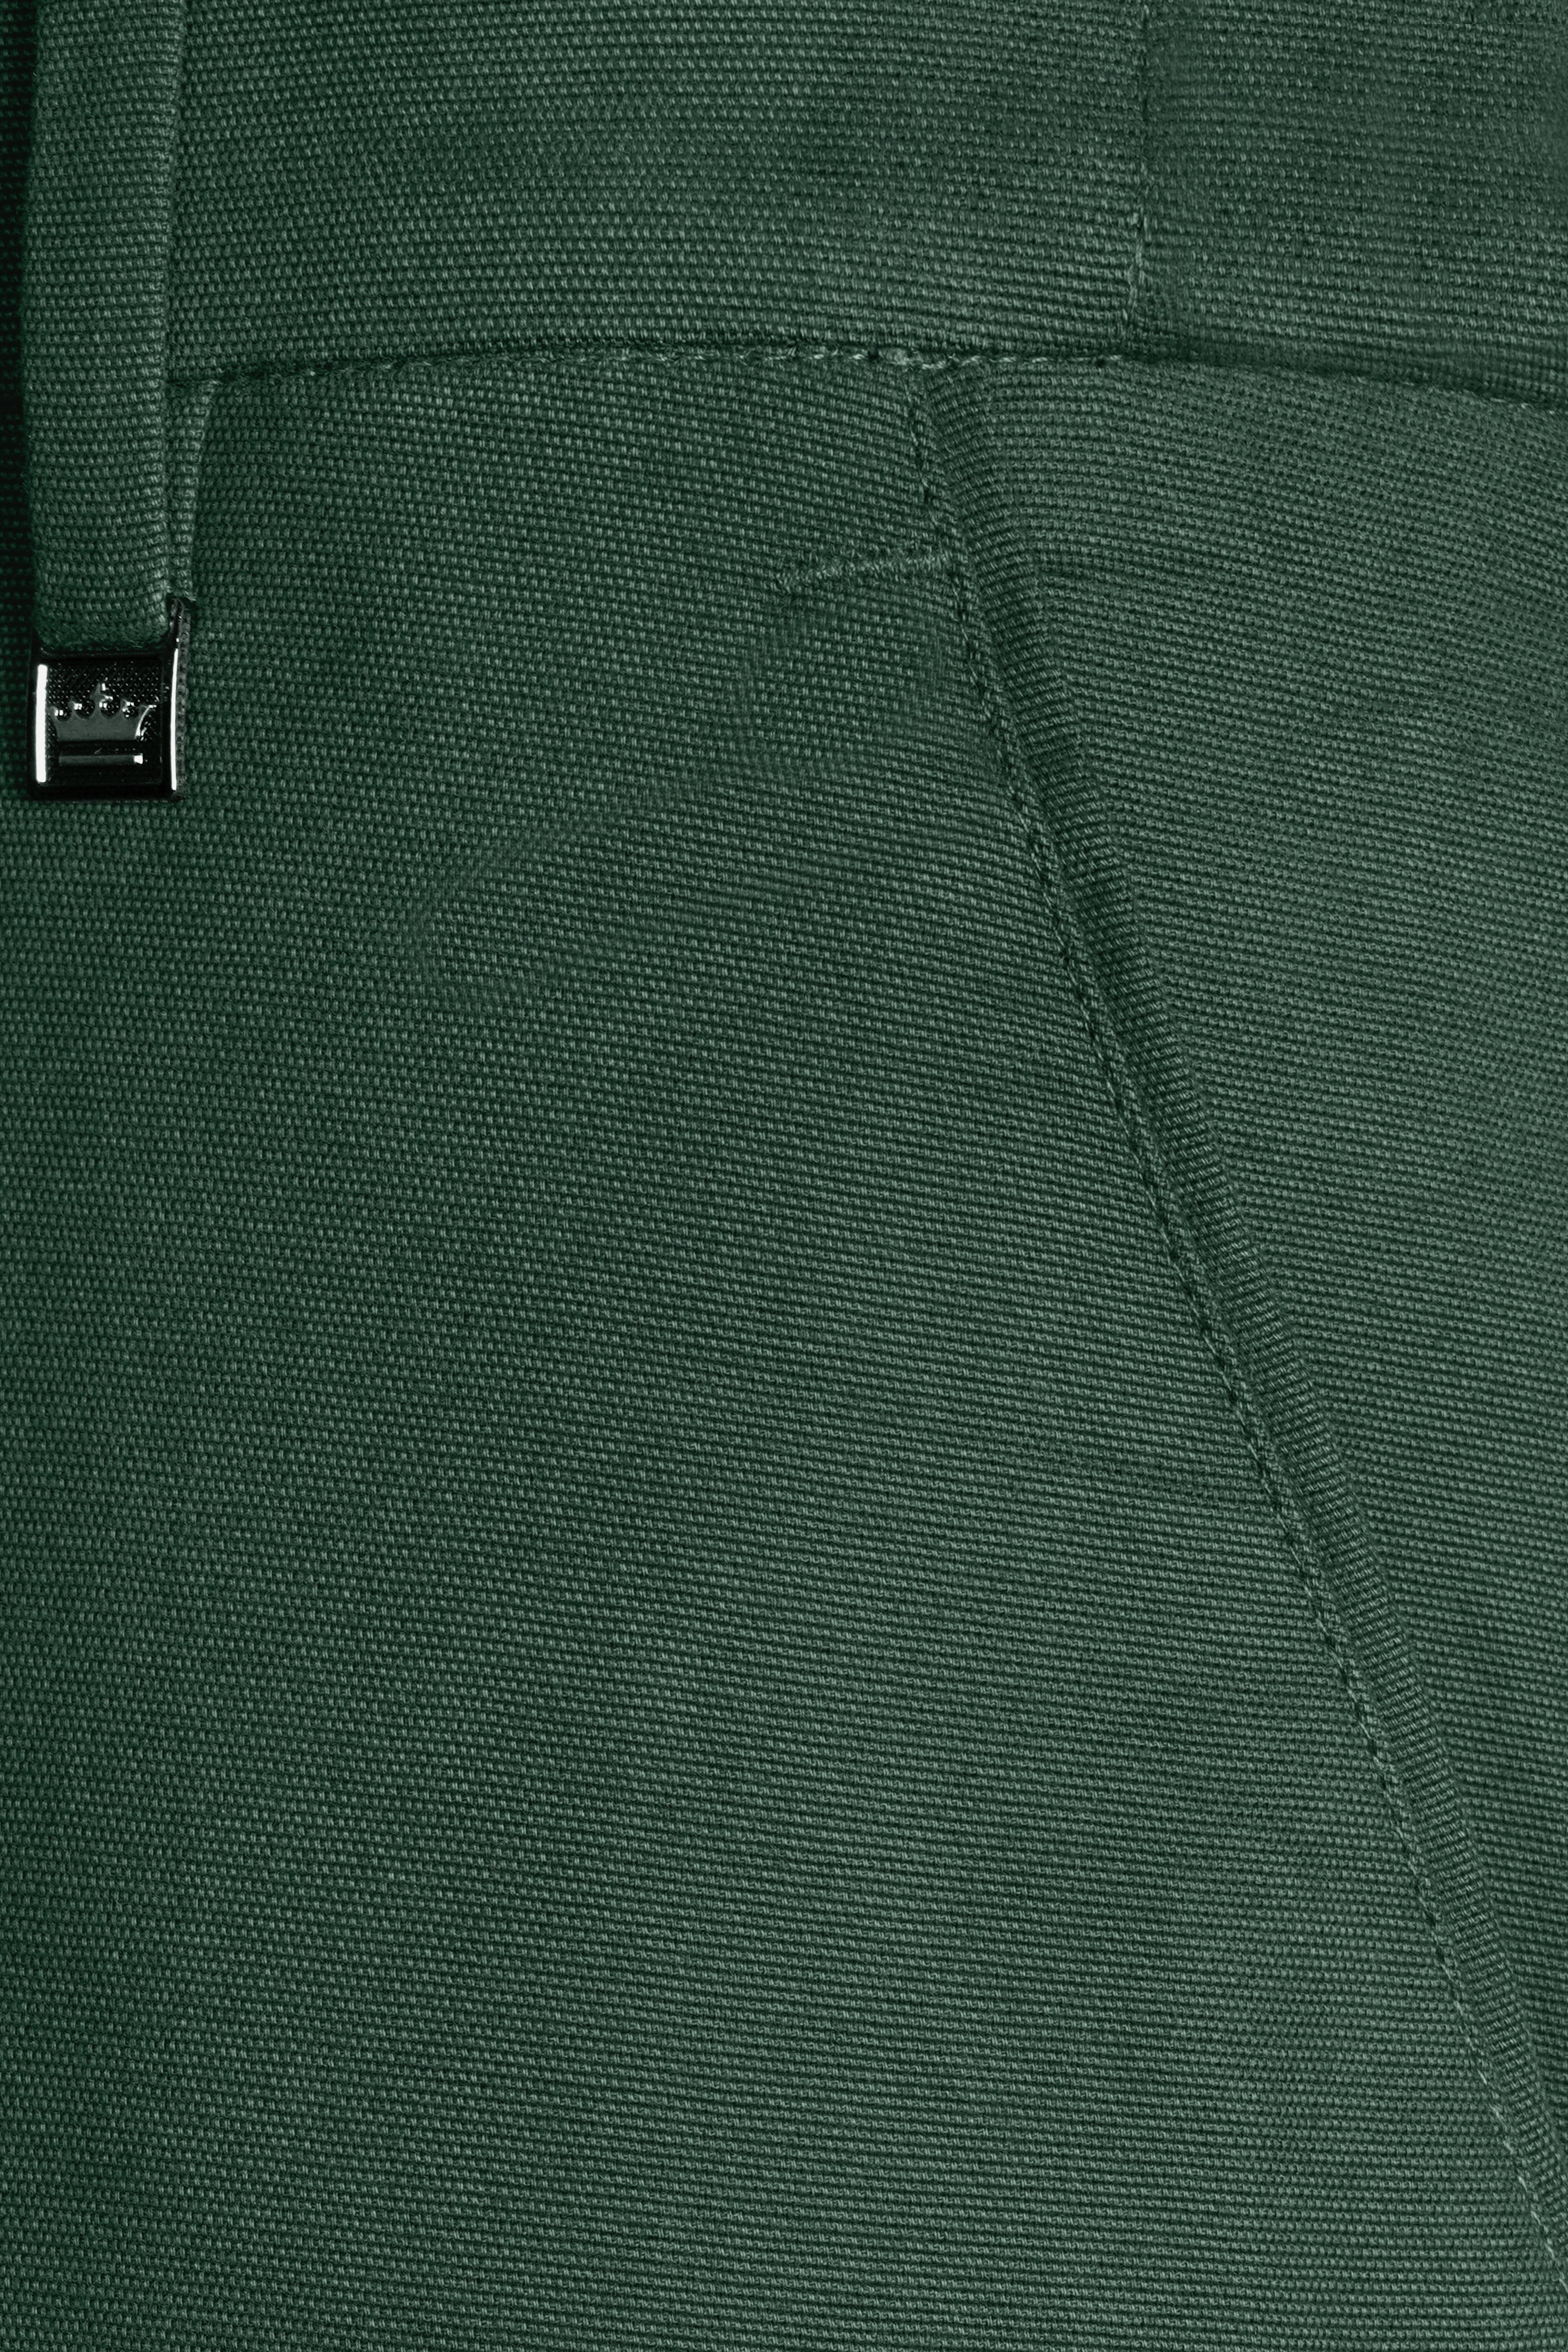 Fern Green Premium Cotton Double Breasted Suit ST2970-DB-PP-36, ST2970-DB-PP-38, ST2970-DB-PP-40, ST2970-DB-PP-42, ST2970-DB-PP-44, ST2970-DB-PP-46, ST2970-DB-PP-48, ST2970-DB-PP-50, ST2970-DB-PP-52, ST2970-DB-PP-54, ST2970-DB-PP-56, ST2970-DB-PP-58, ST2970-DB-PP-60